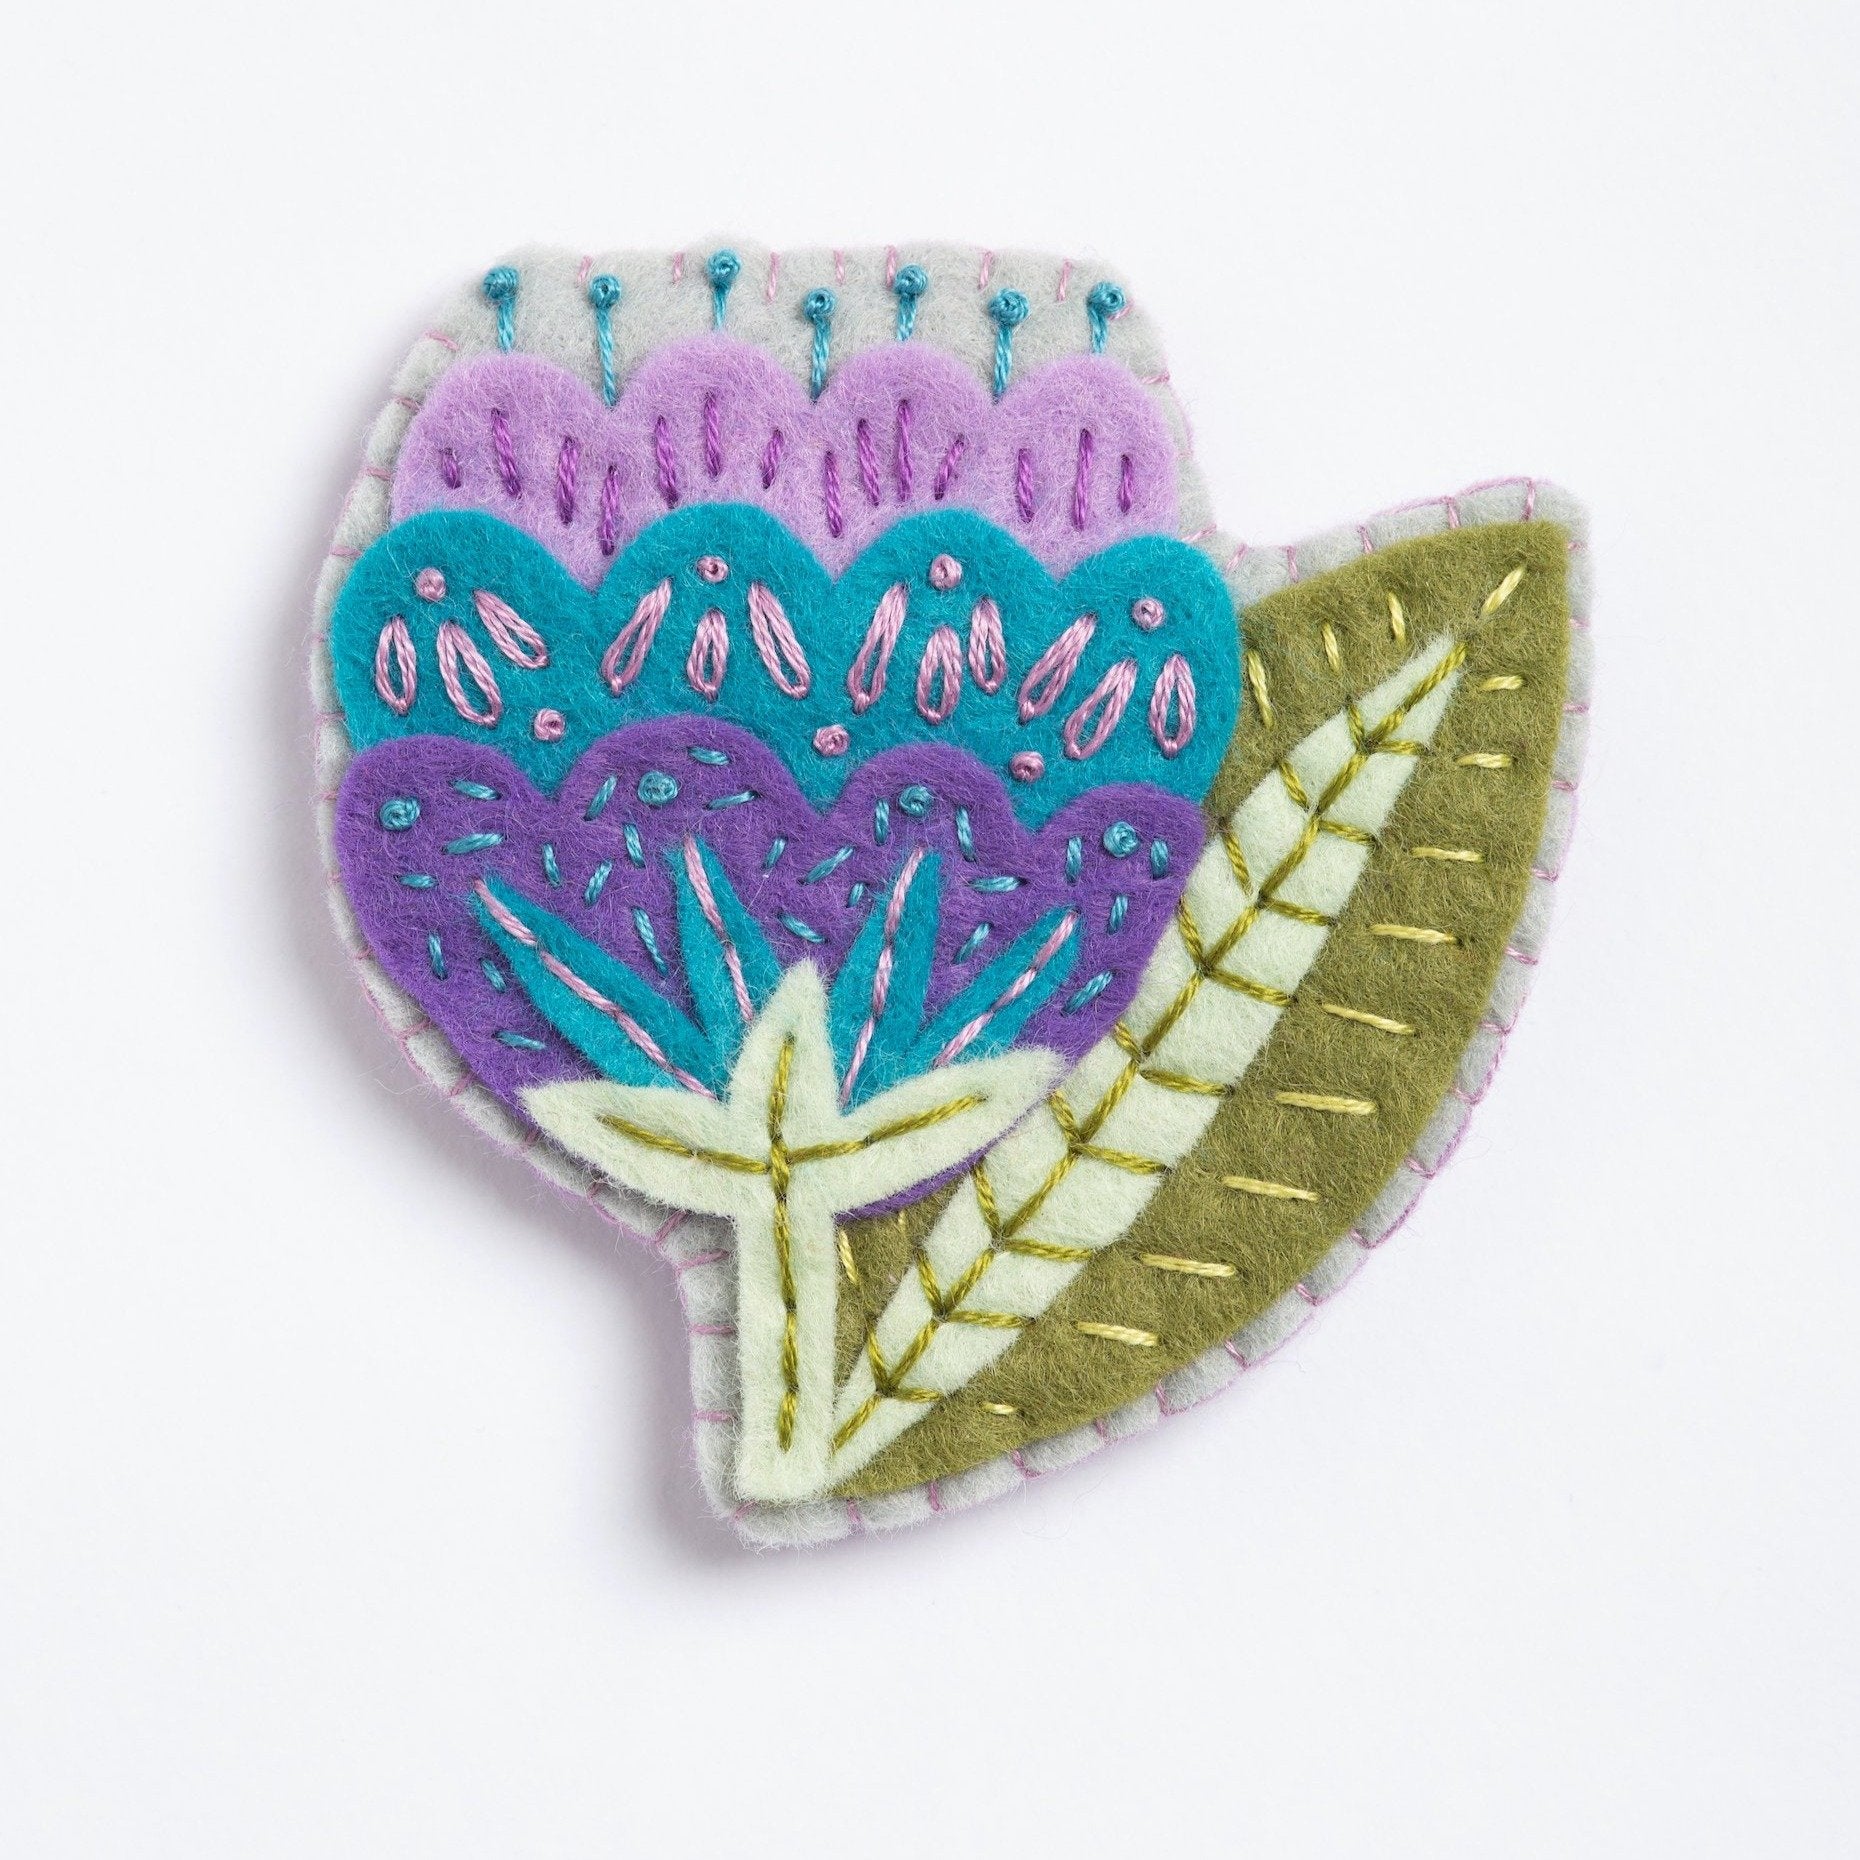 Clipped image of vita flower brooch on white background.